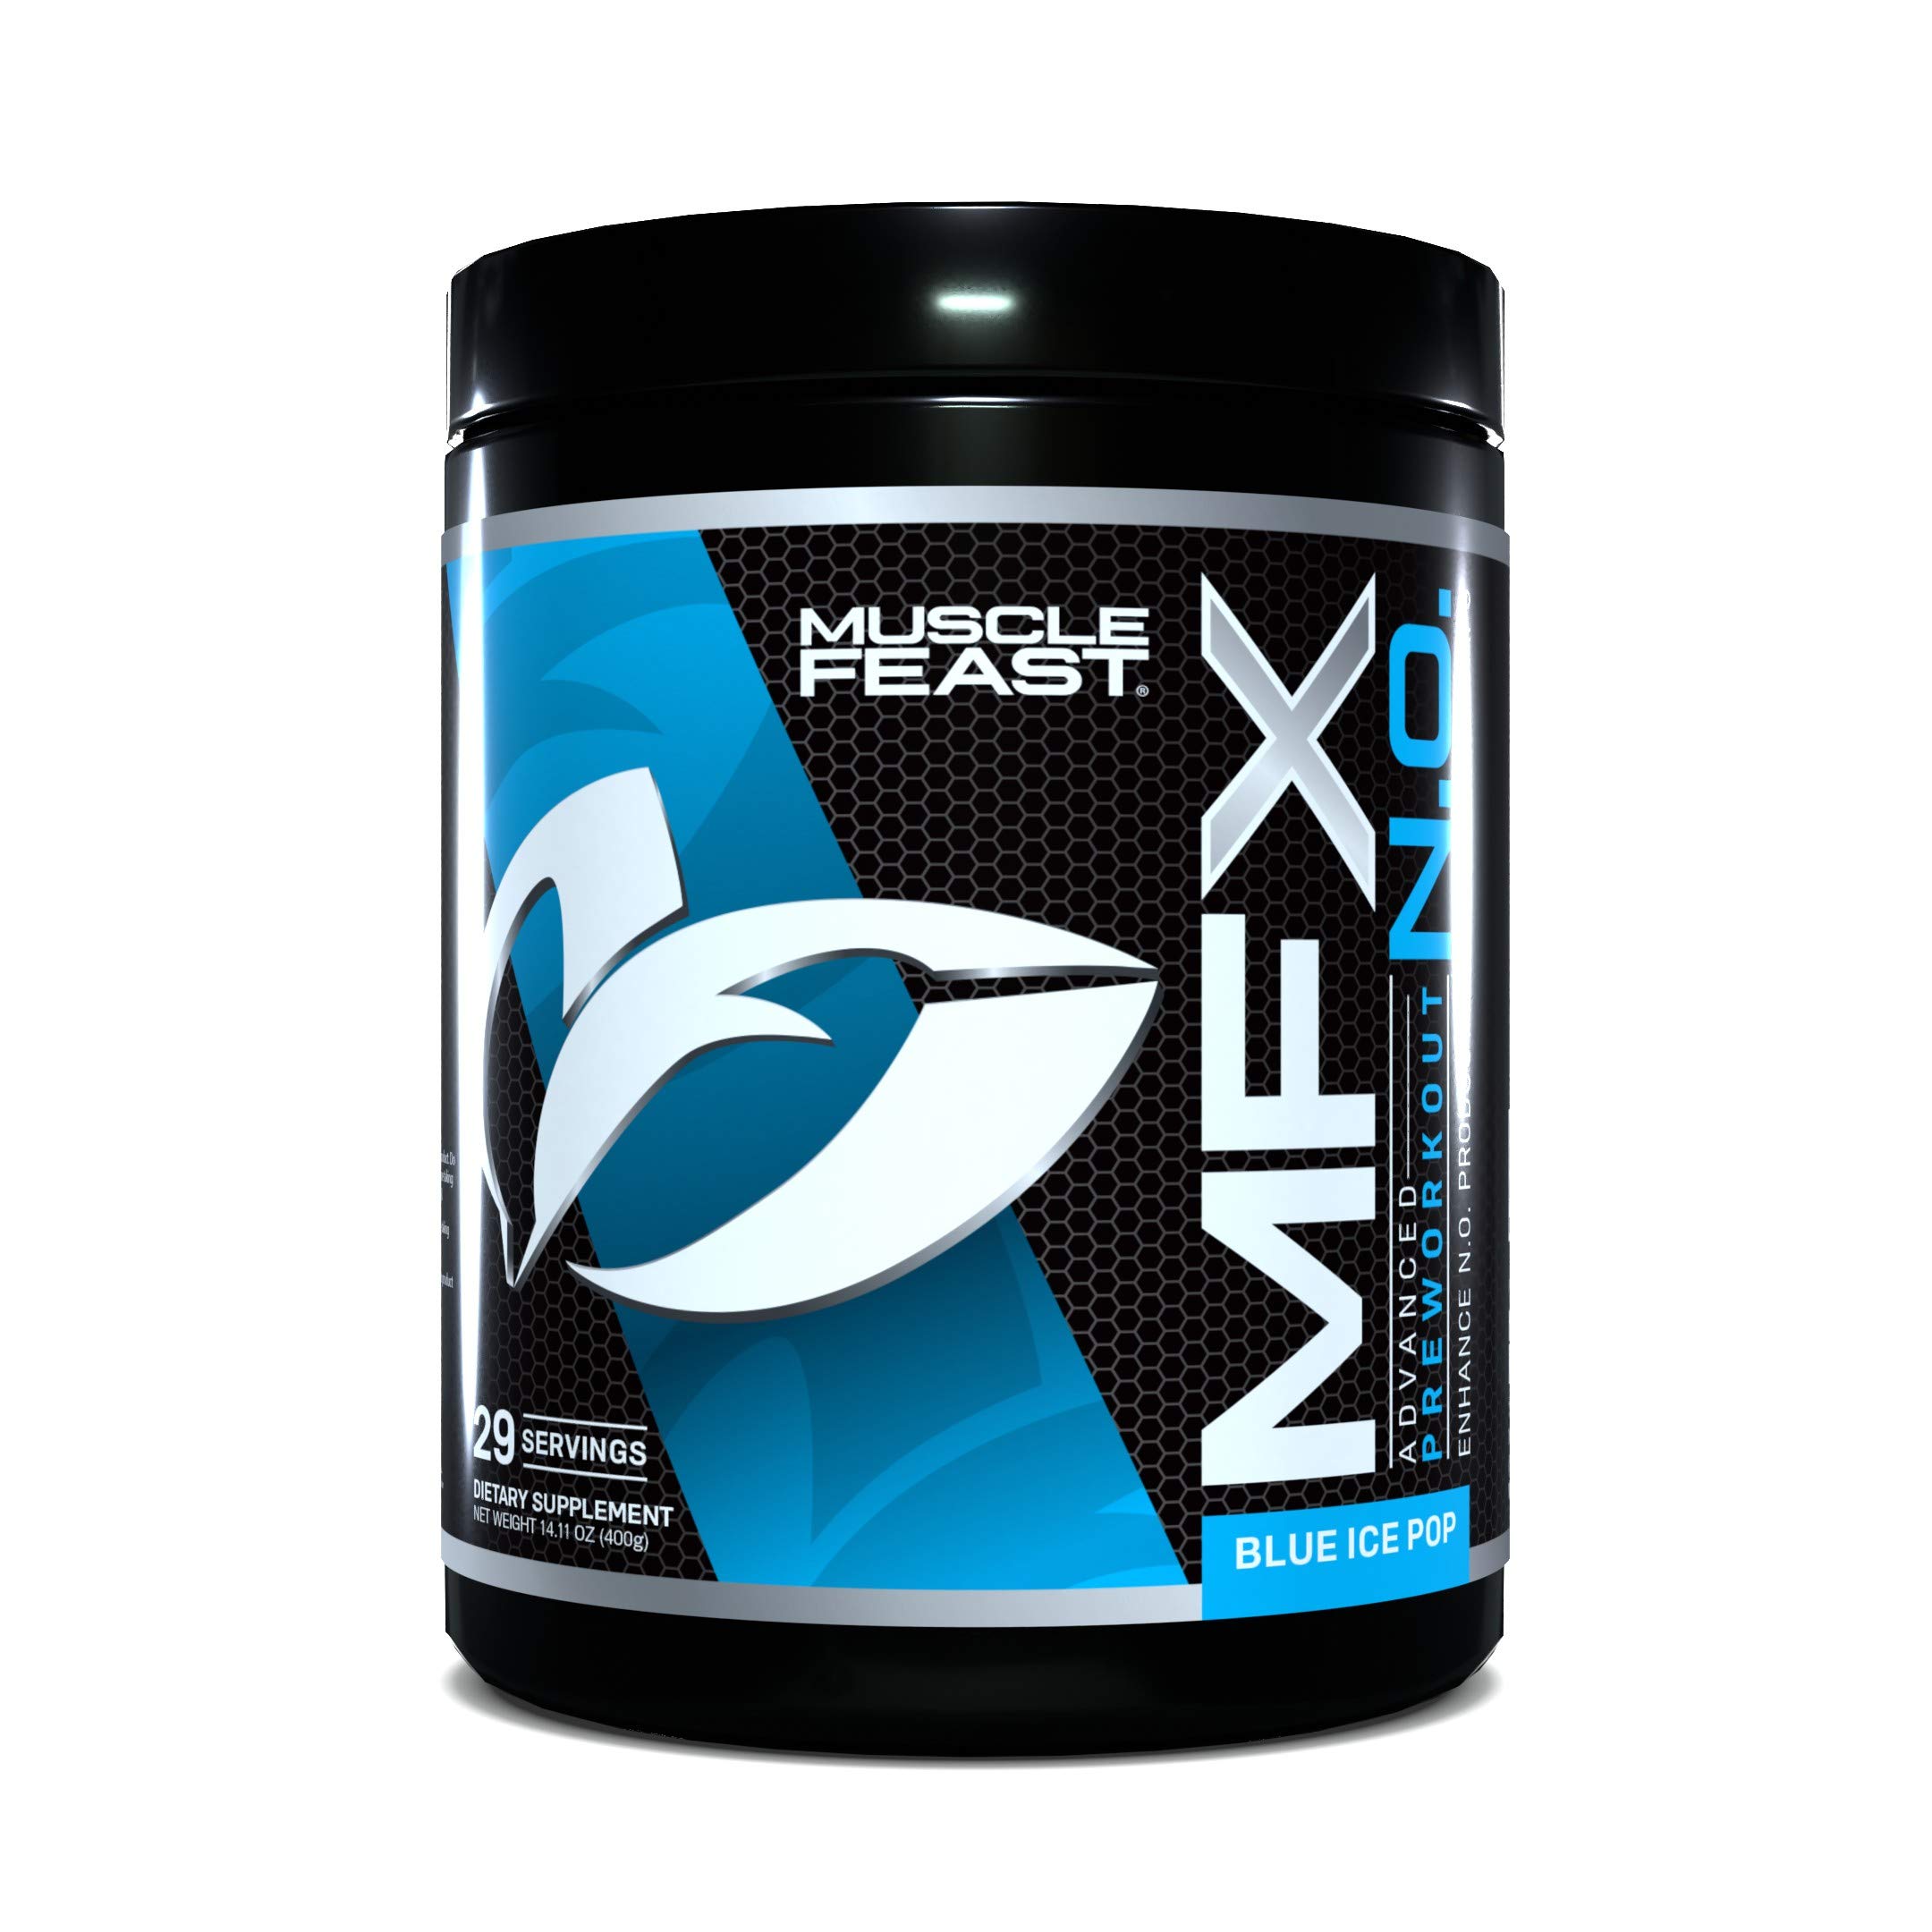 MUSCLE FEAST MFX N.O., Intense Preworkout Powder, Nitric Oxide Booster, Stimulant Free, 29 Servings, 400 Gram Container (Blue Ice Pop)